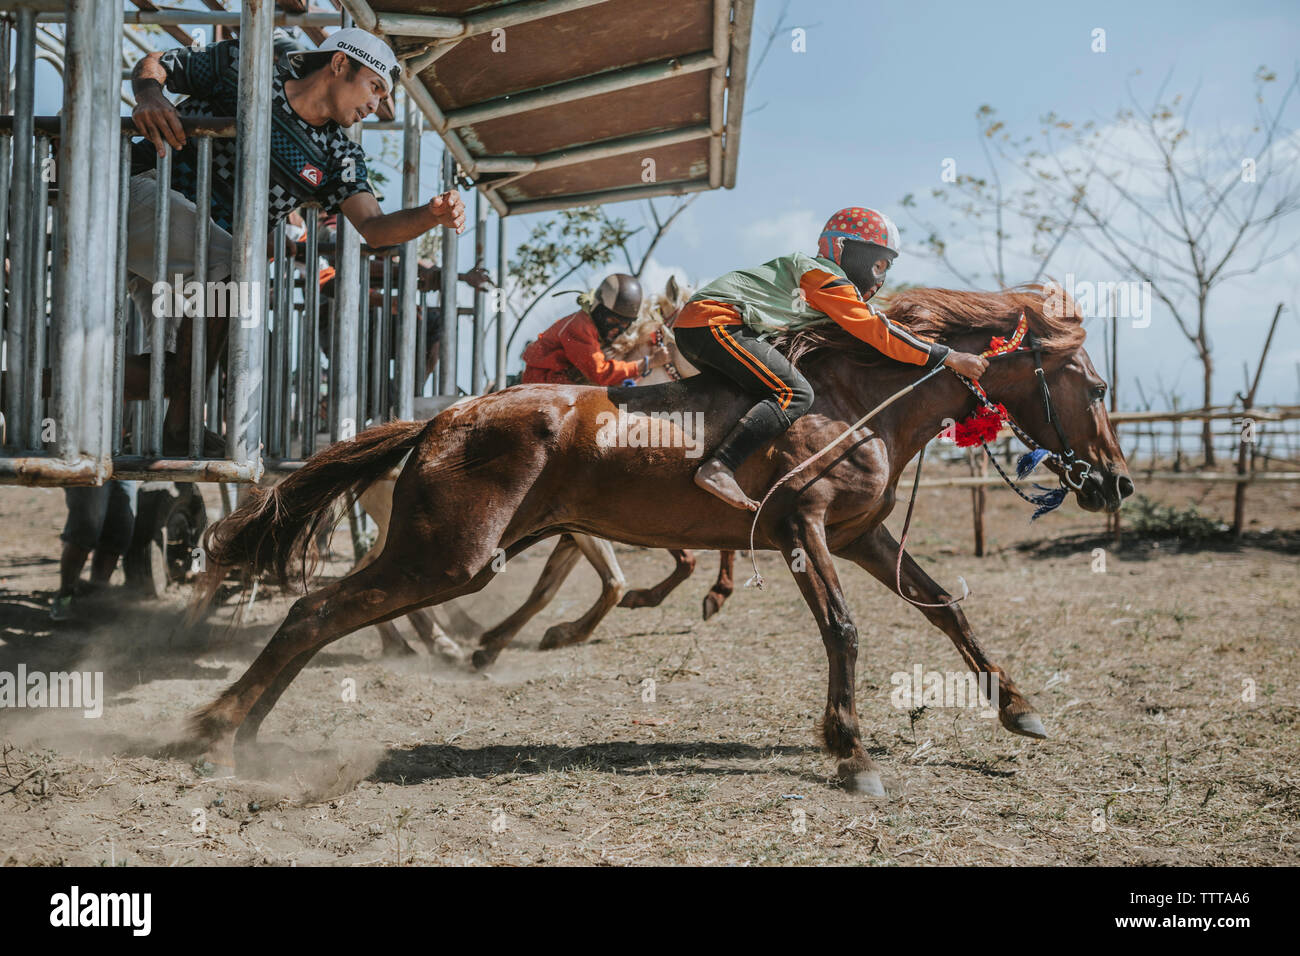 Child jockeys on racehorses at starting gate during horse racing Stock Photo